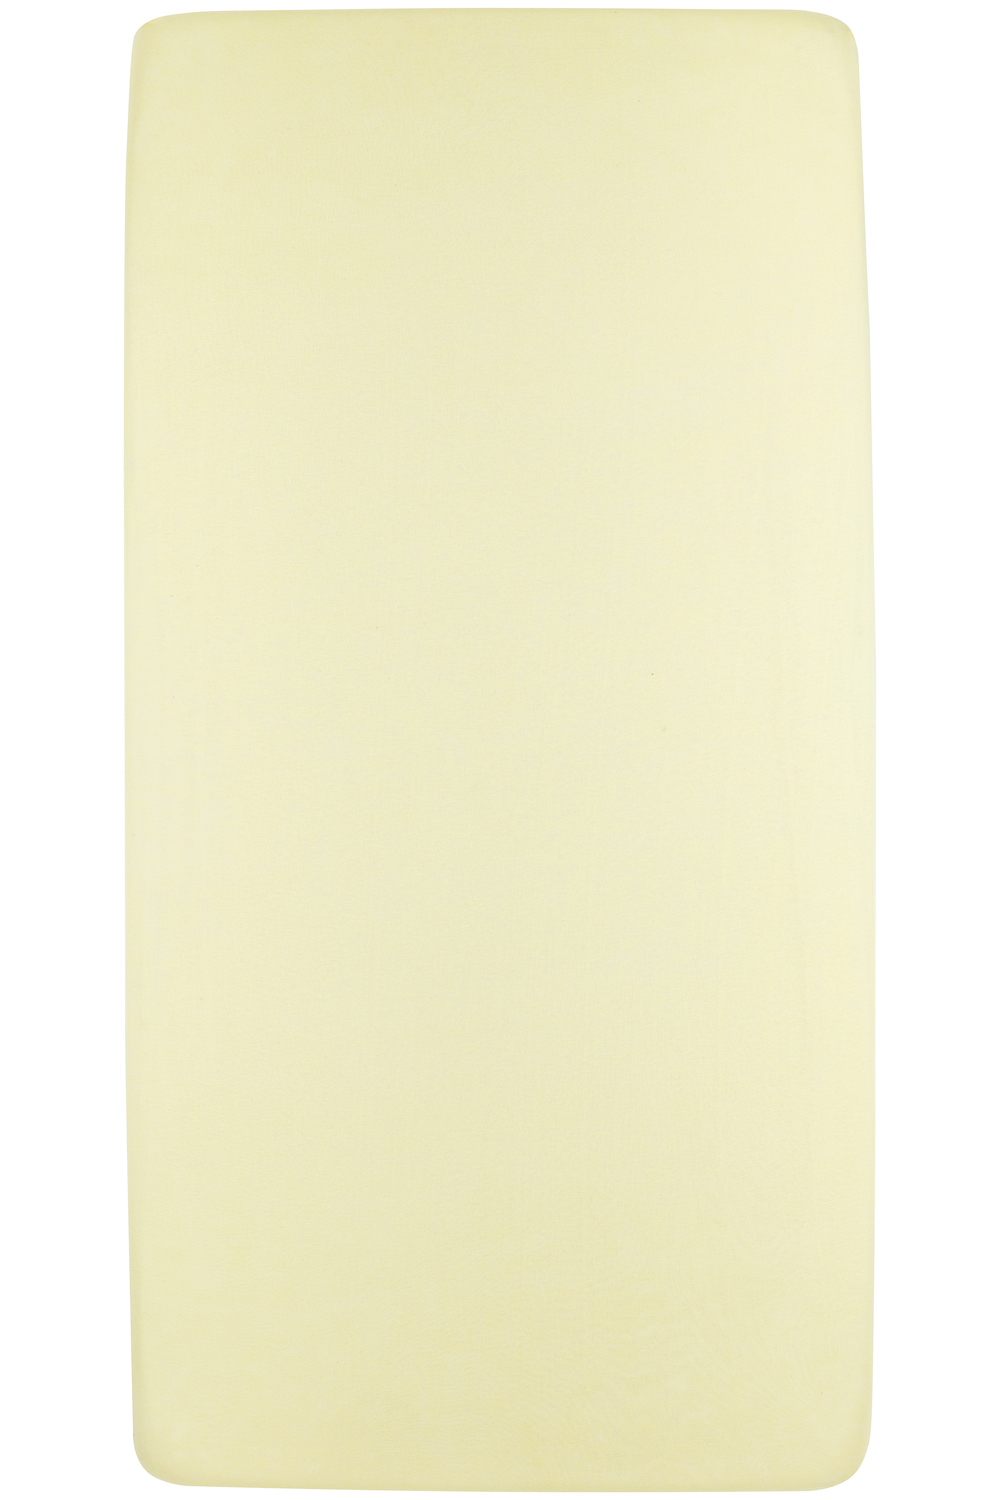 Fitted sheet 1-Pers. Uni - soft yellow - 90x200cm